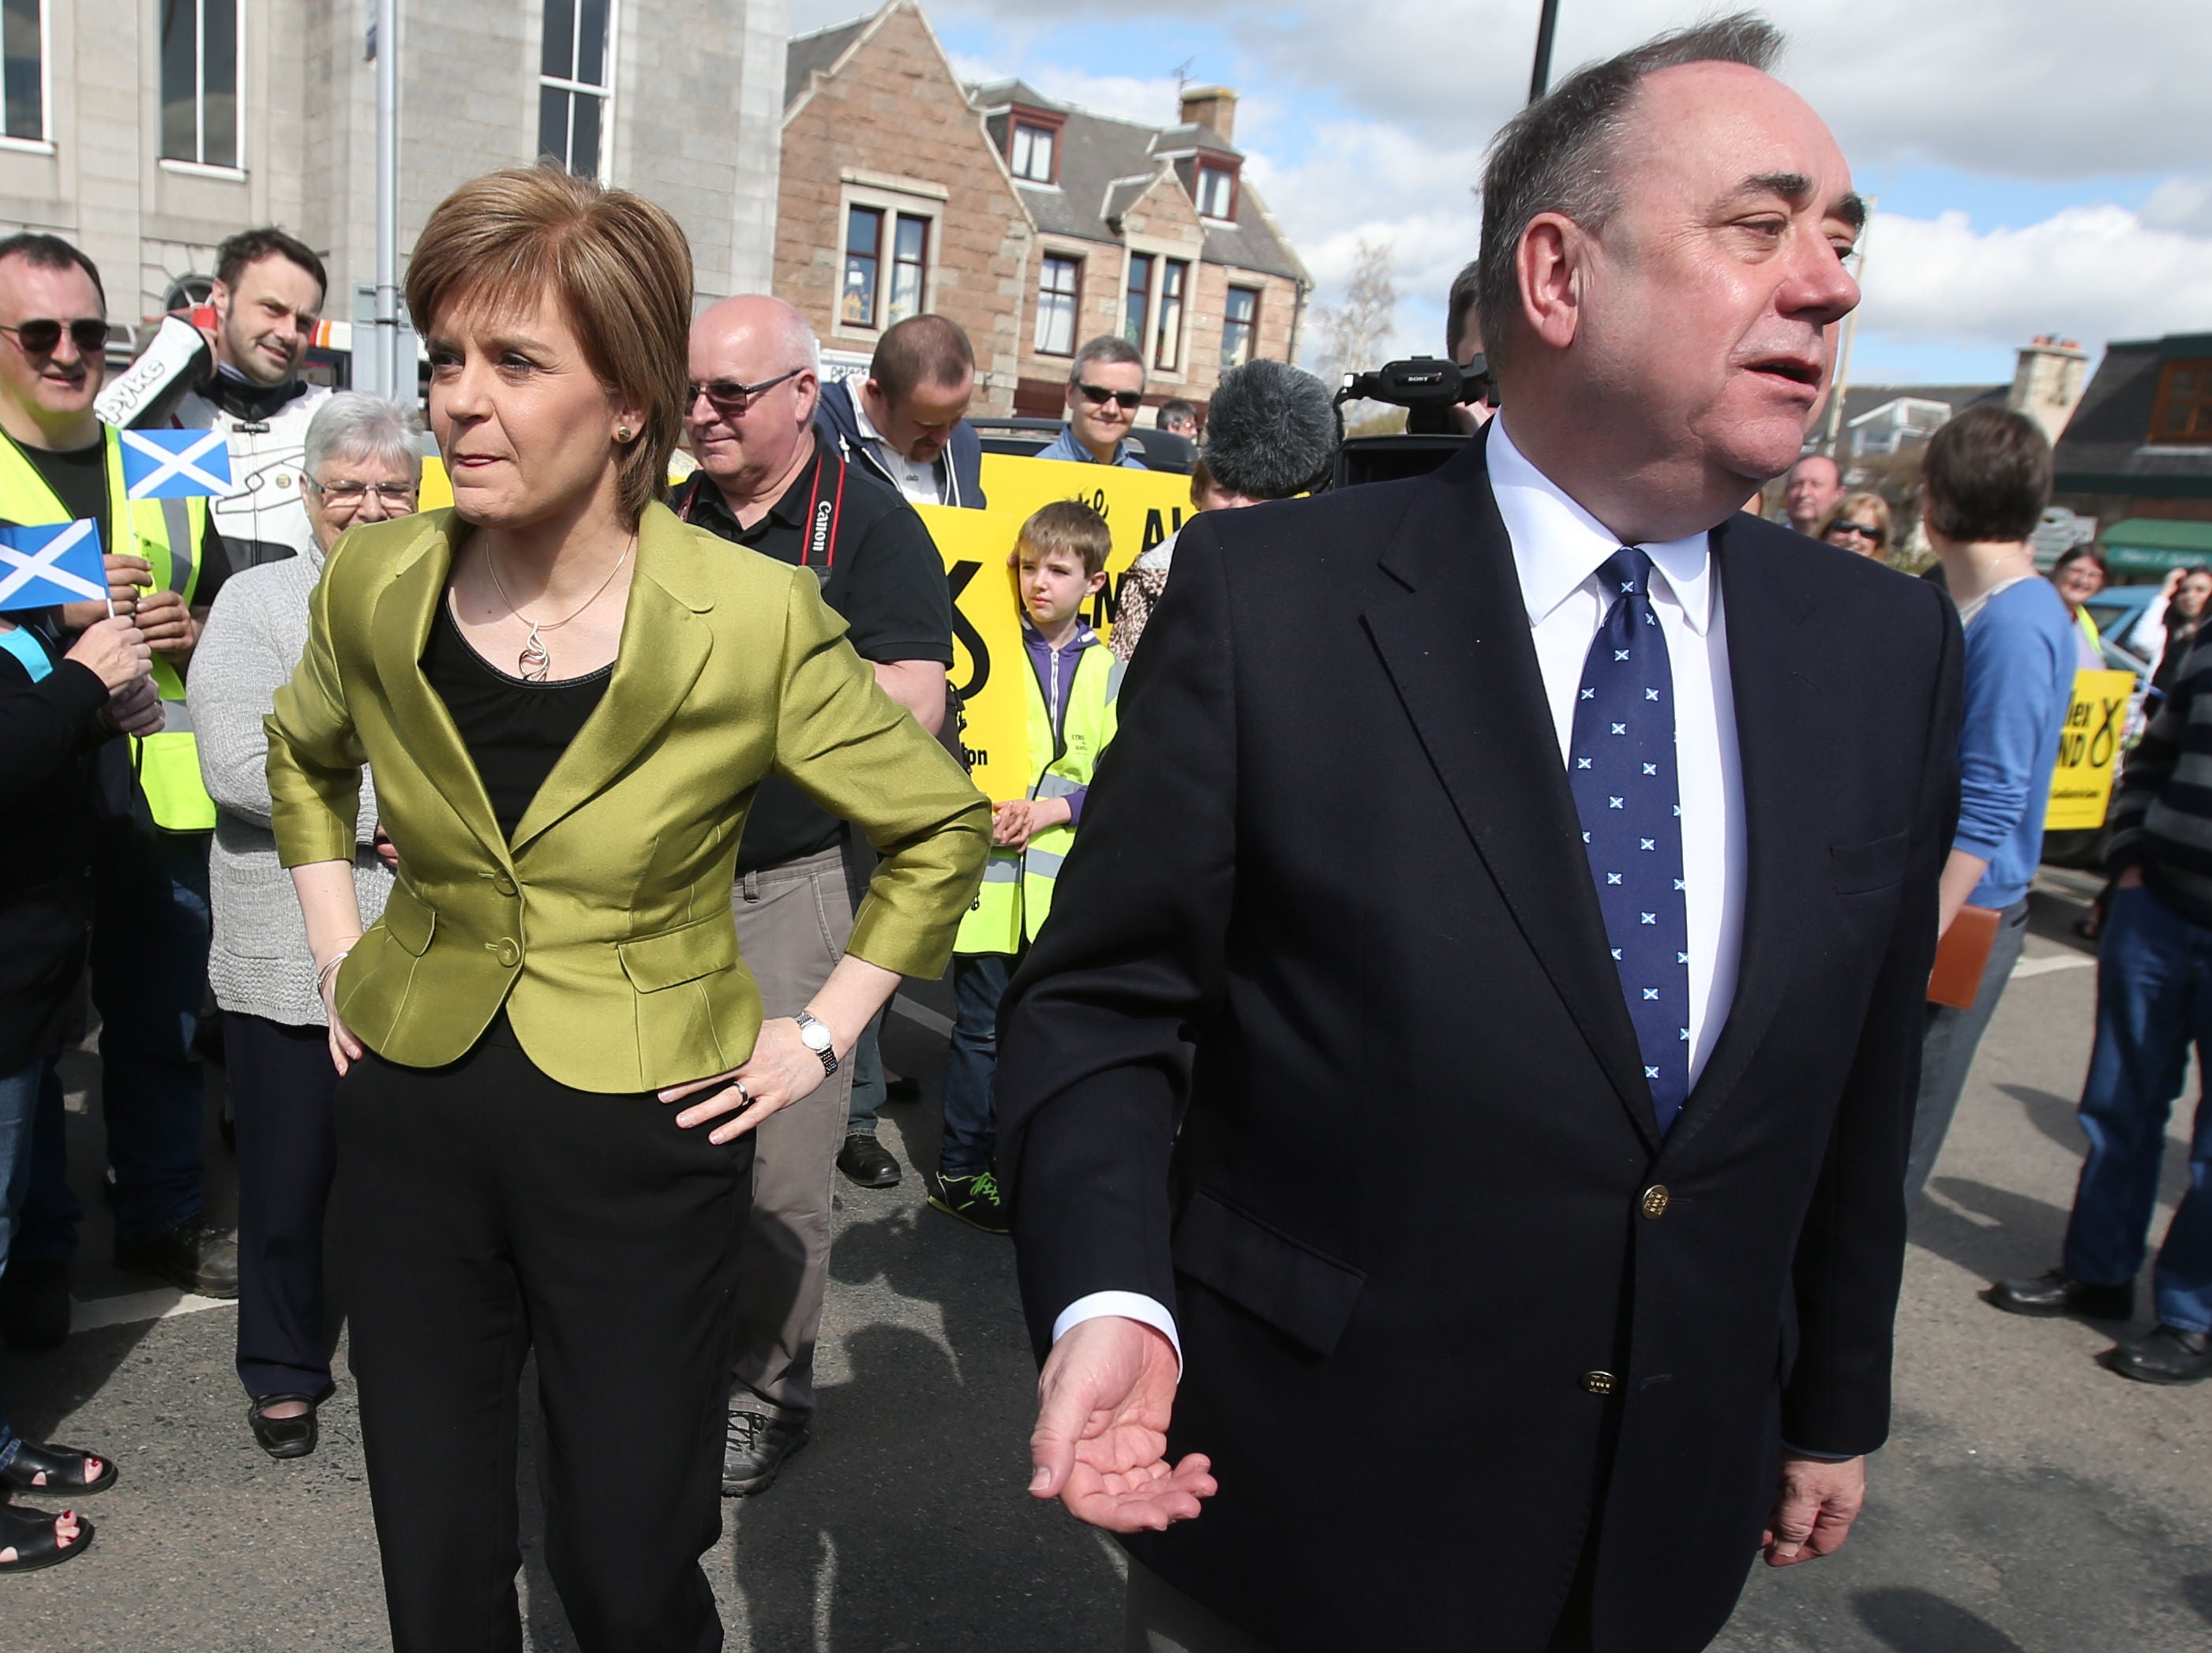 The First Minister took over from Alex Salmond in 2014 (Andrew Milligan/PA)